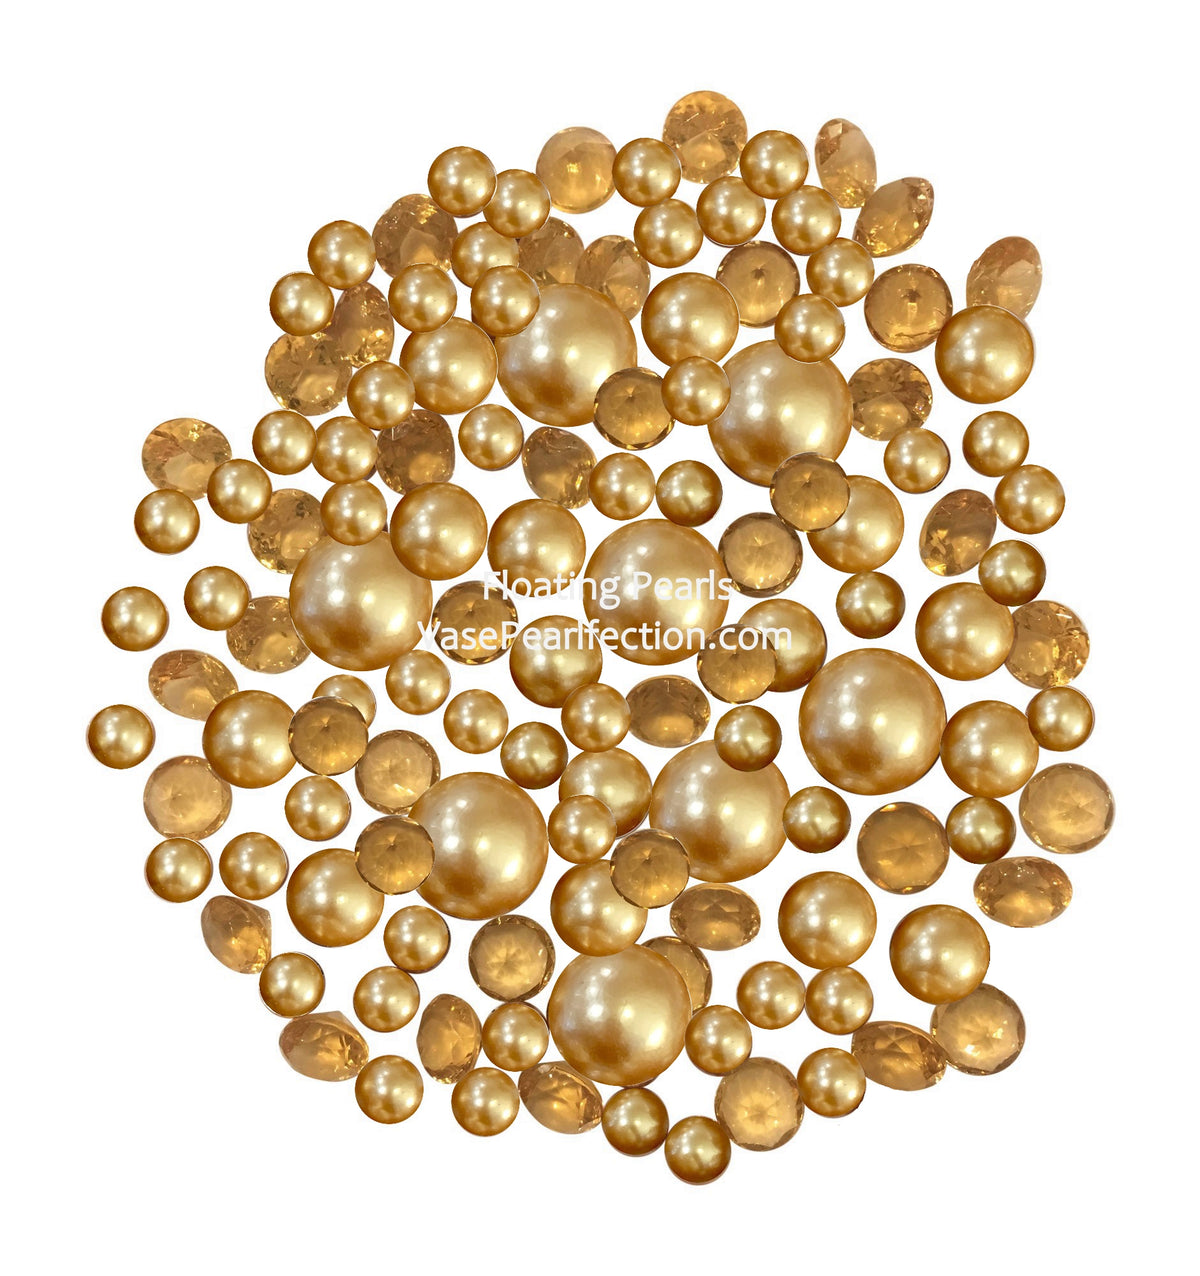 SUREAM Gold Assorted Floating Pearls, 100PCS Art Faux Pearls and